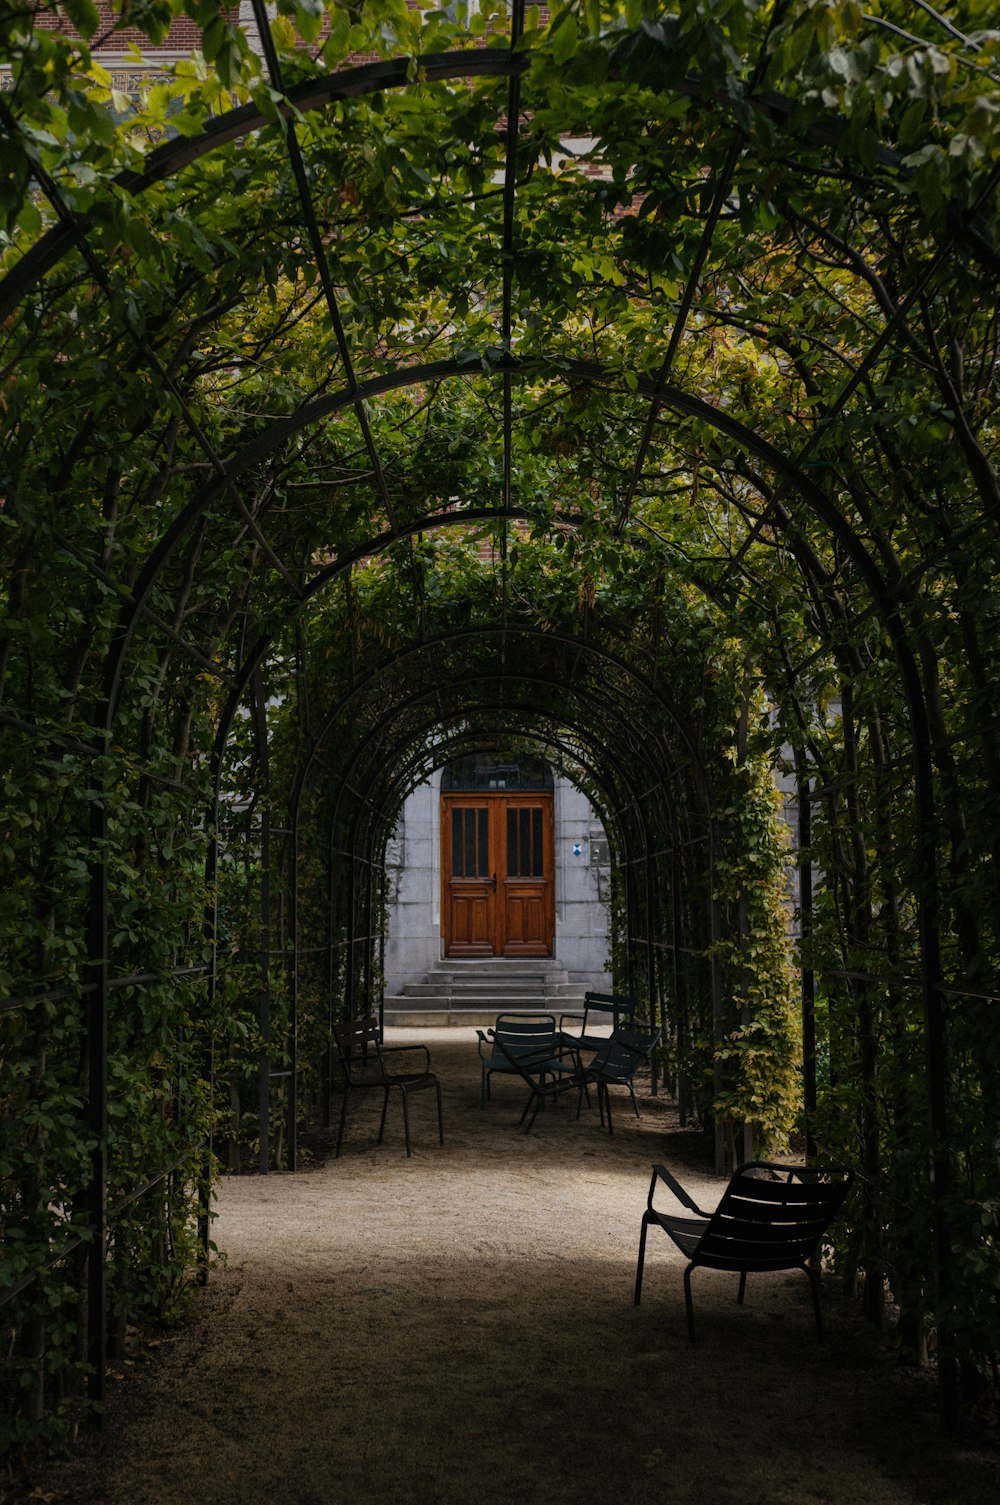 an archway with benches and a red door